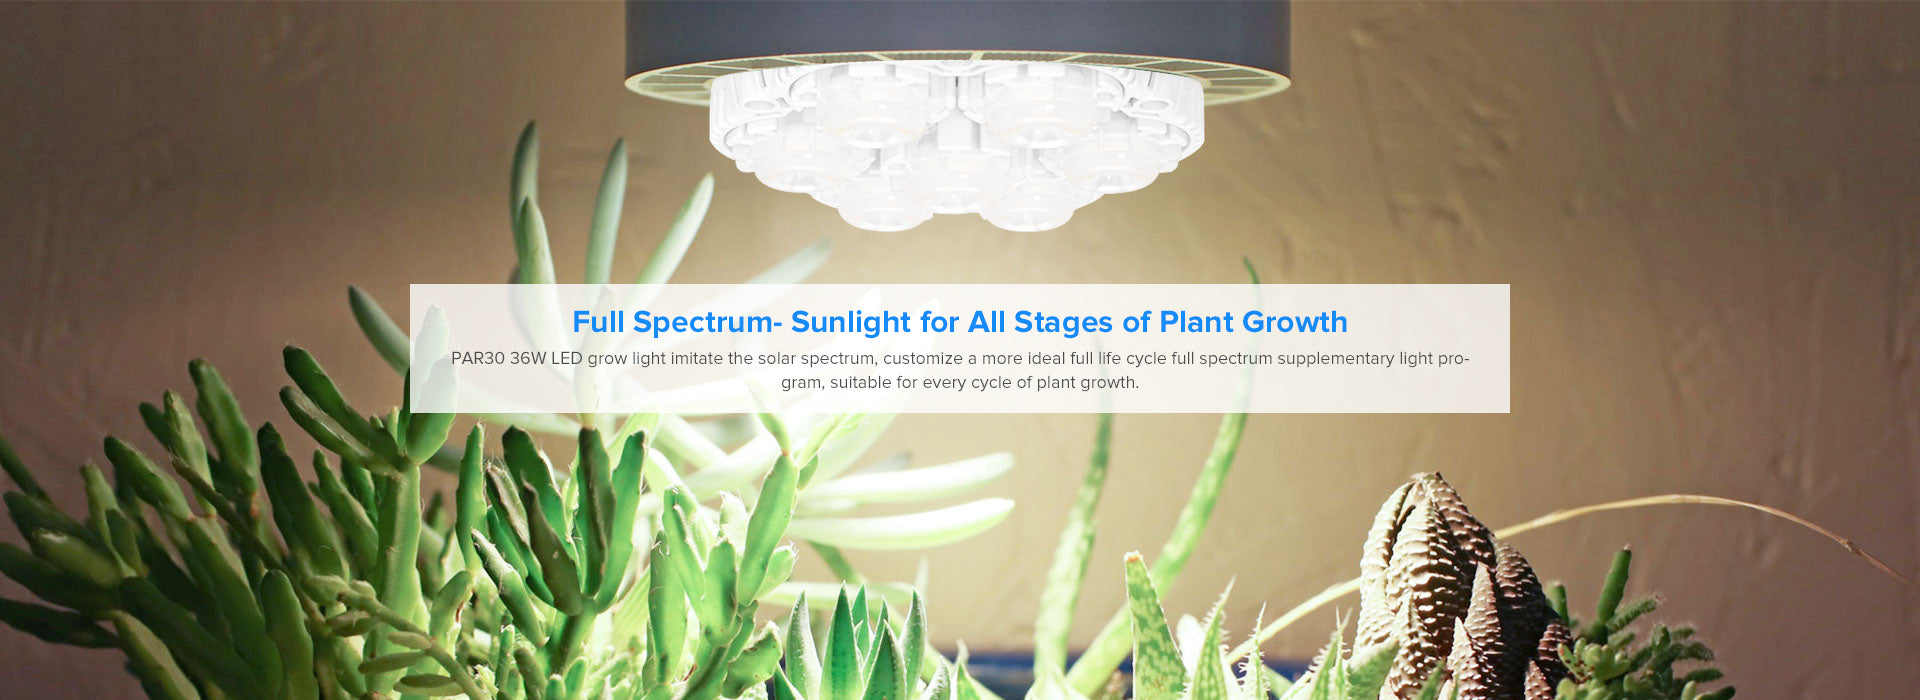 36W led grow light bulb with full spectrum sunlight for all stages of plant growth